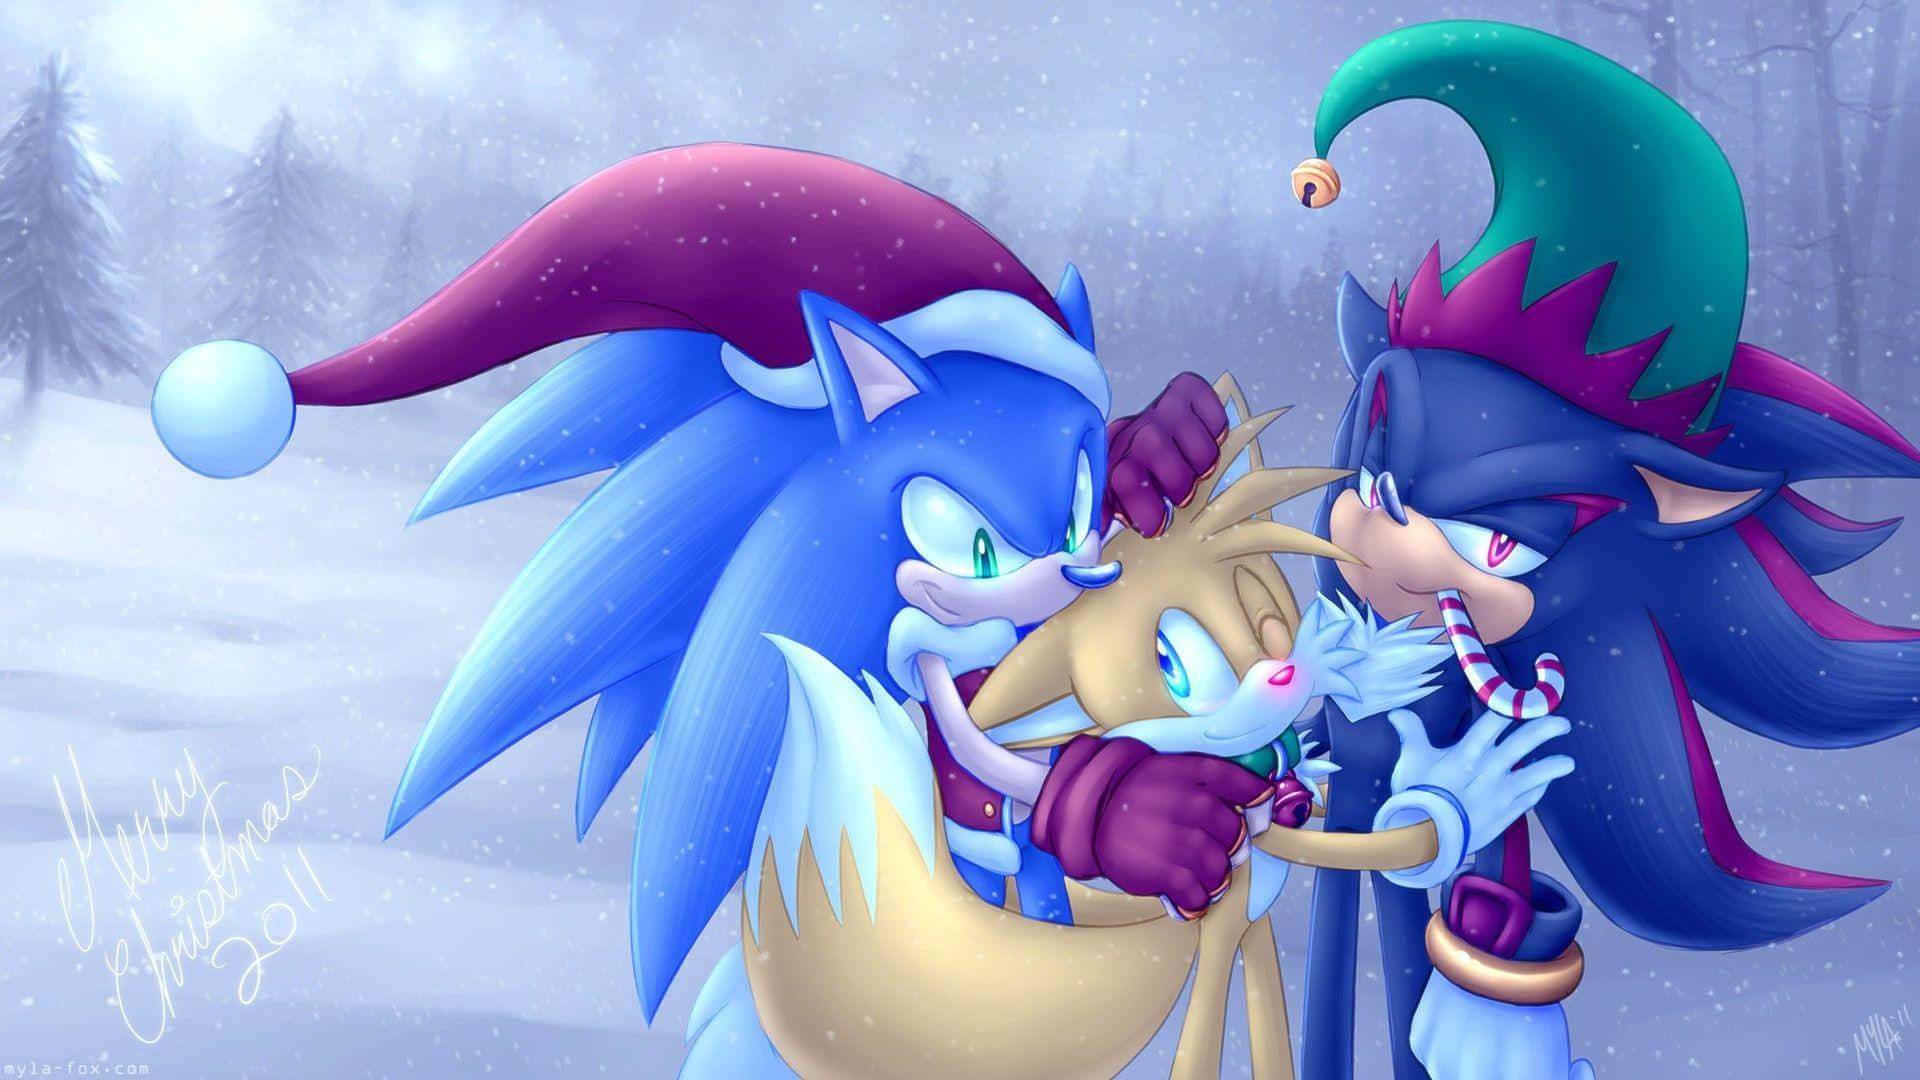 Sonic And Sonic The Hedgehog In Santa Hats Background